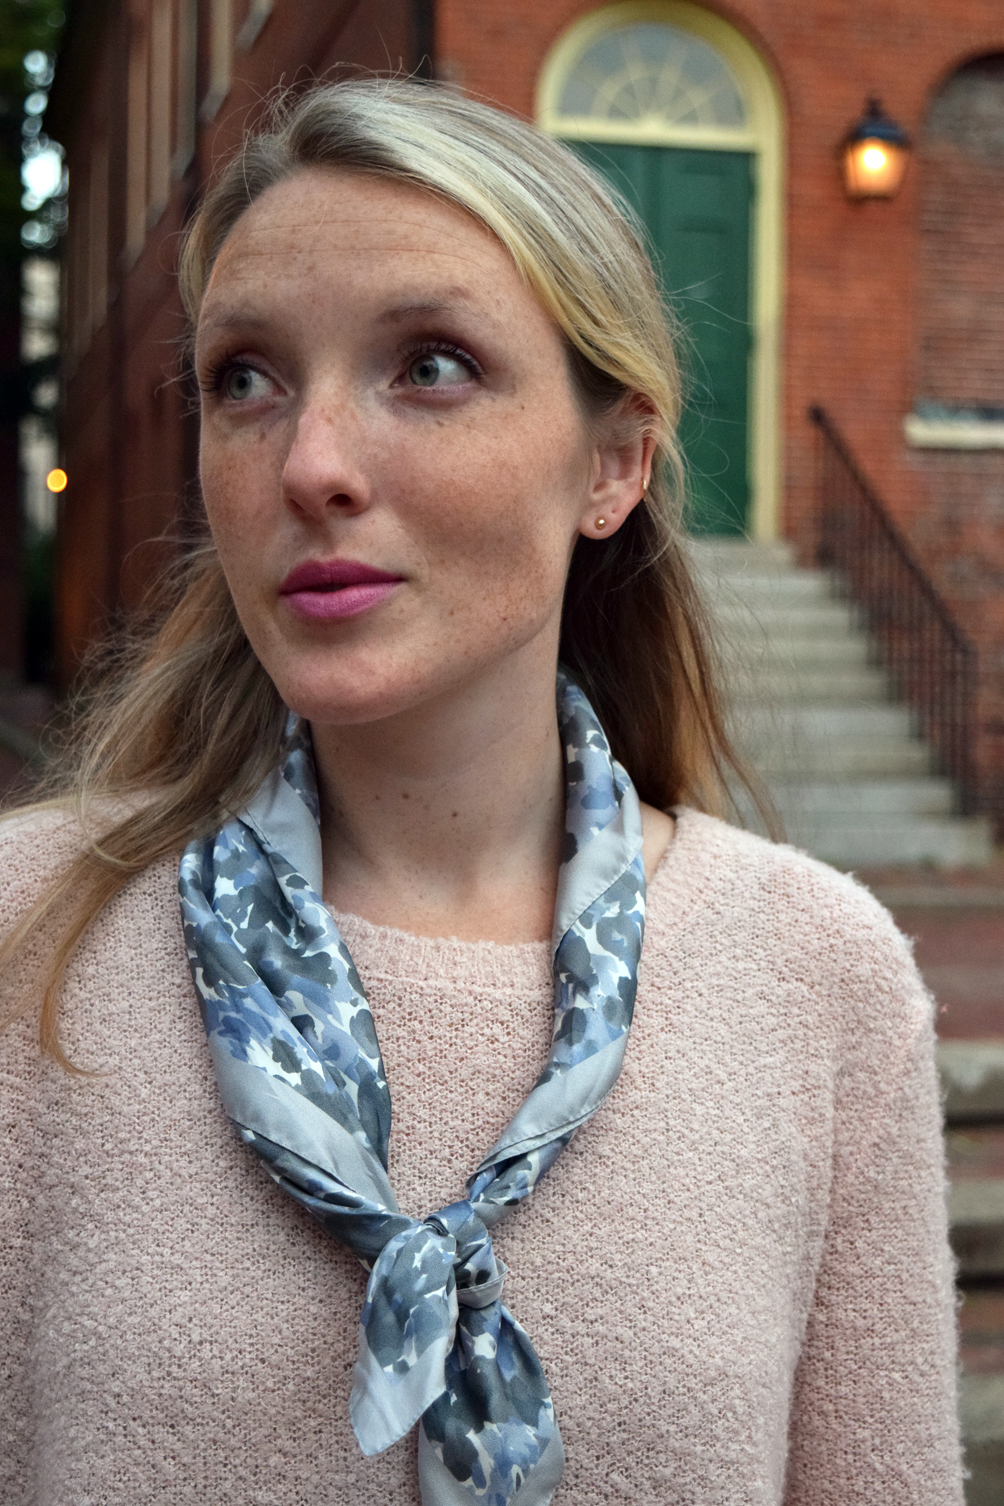 printed scarf and pink lipstick